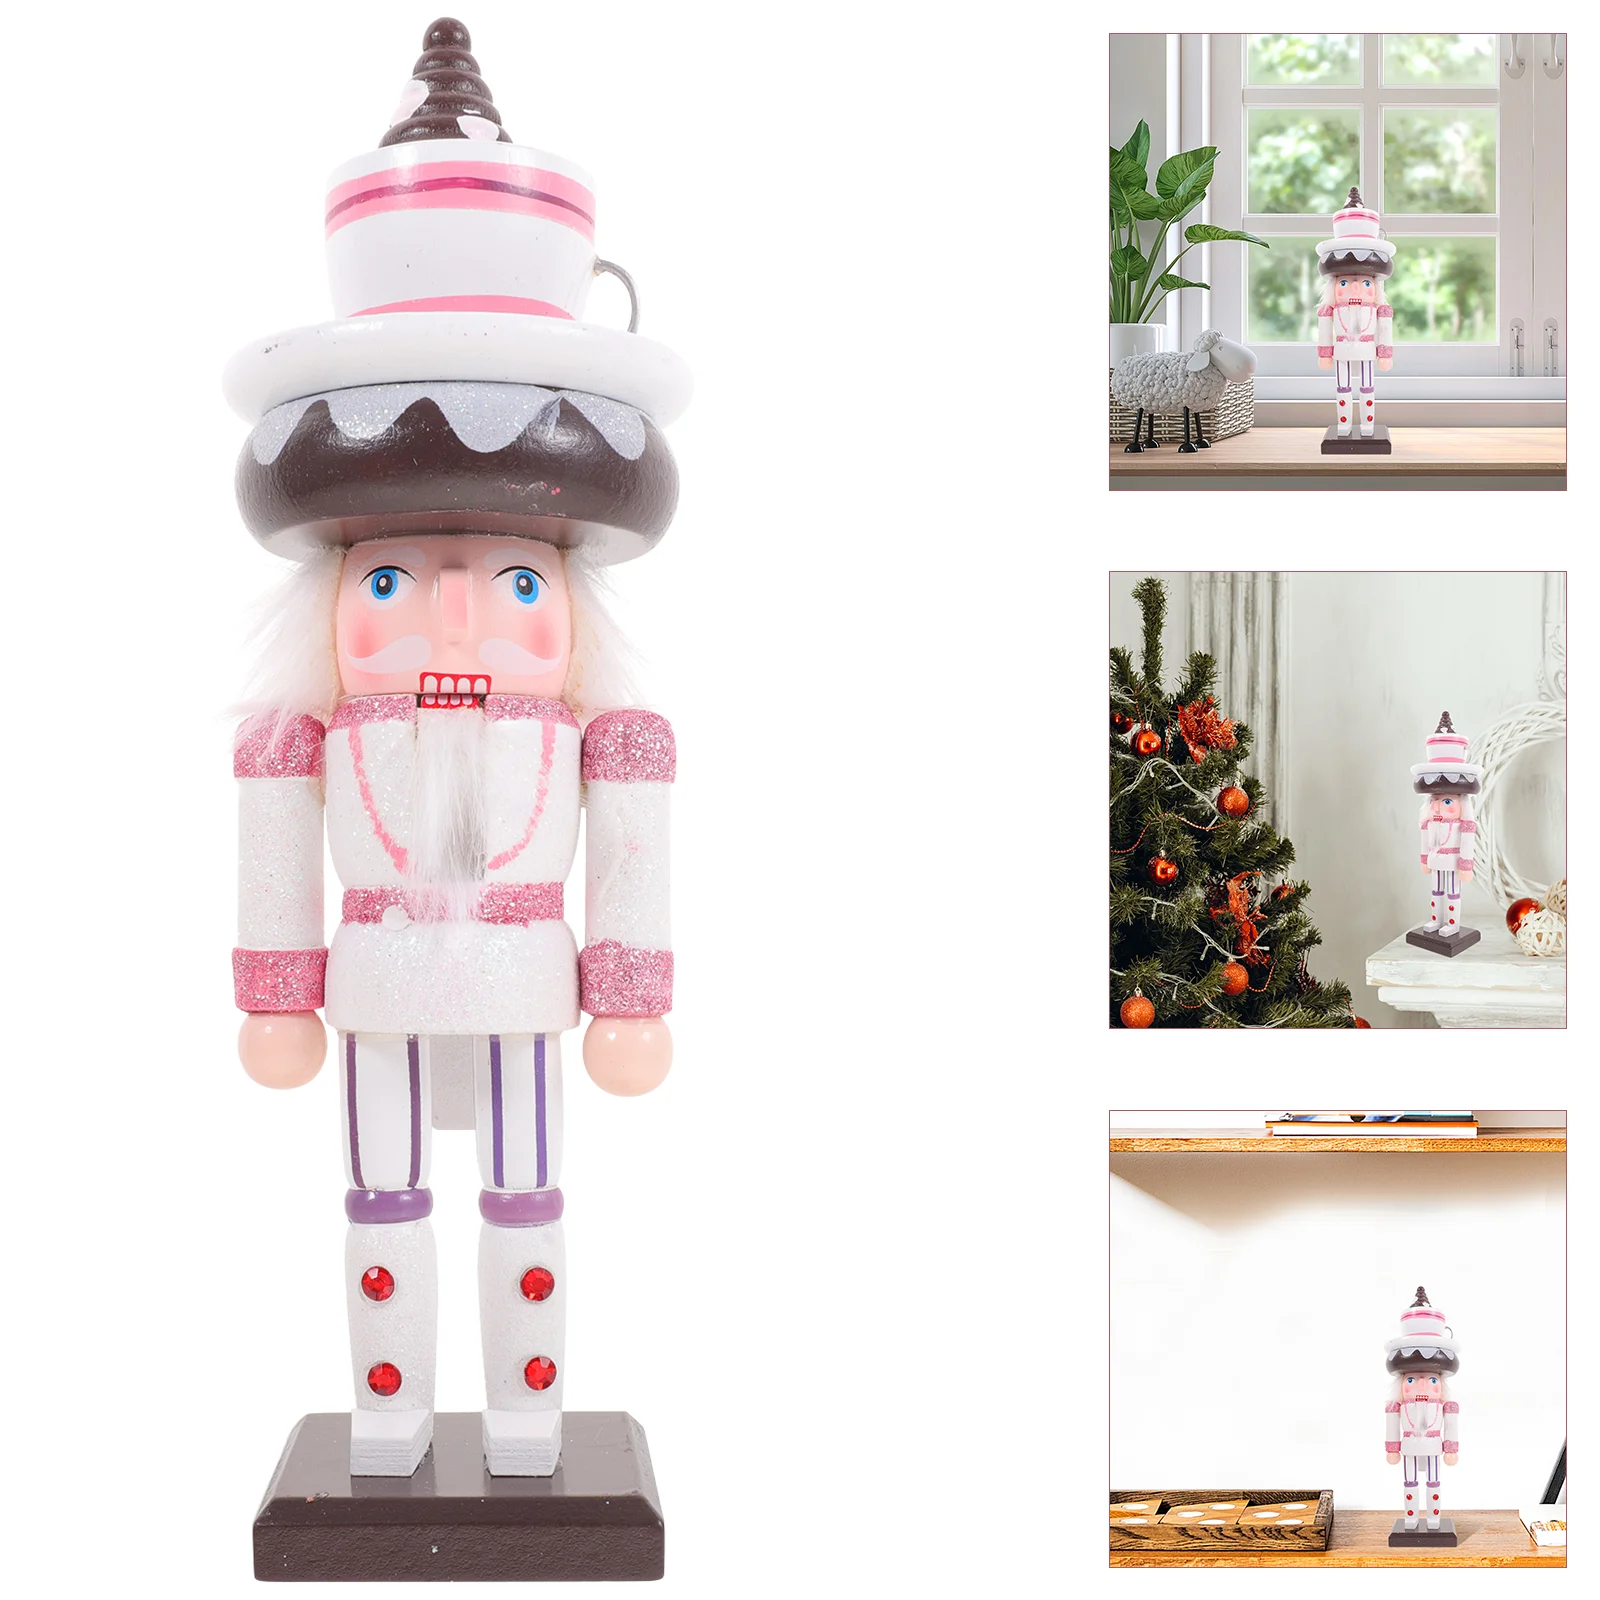 

Nutcracker Wooden Christmas Ornament Decorations Table Figurine Toy Puppet Nutcrackers Walnut Figurines Soldier Figures Hanging